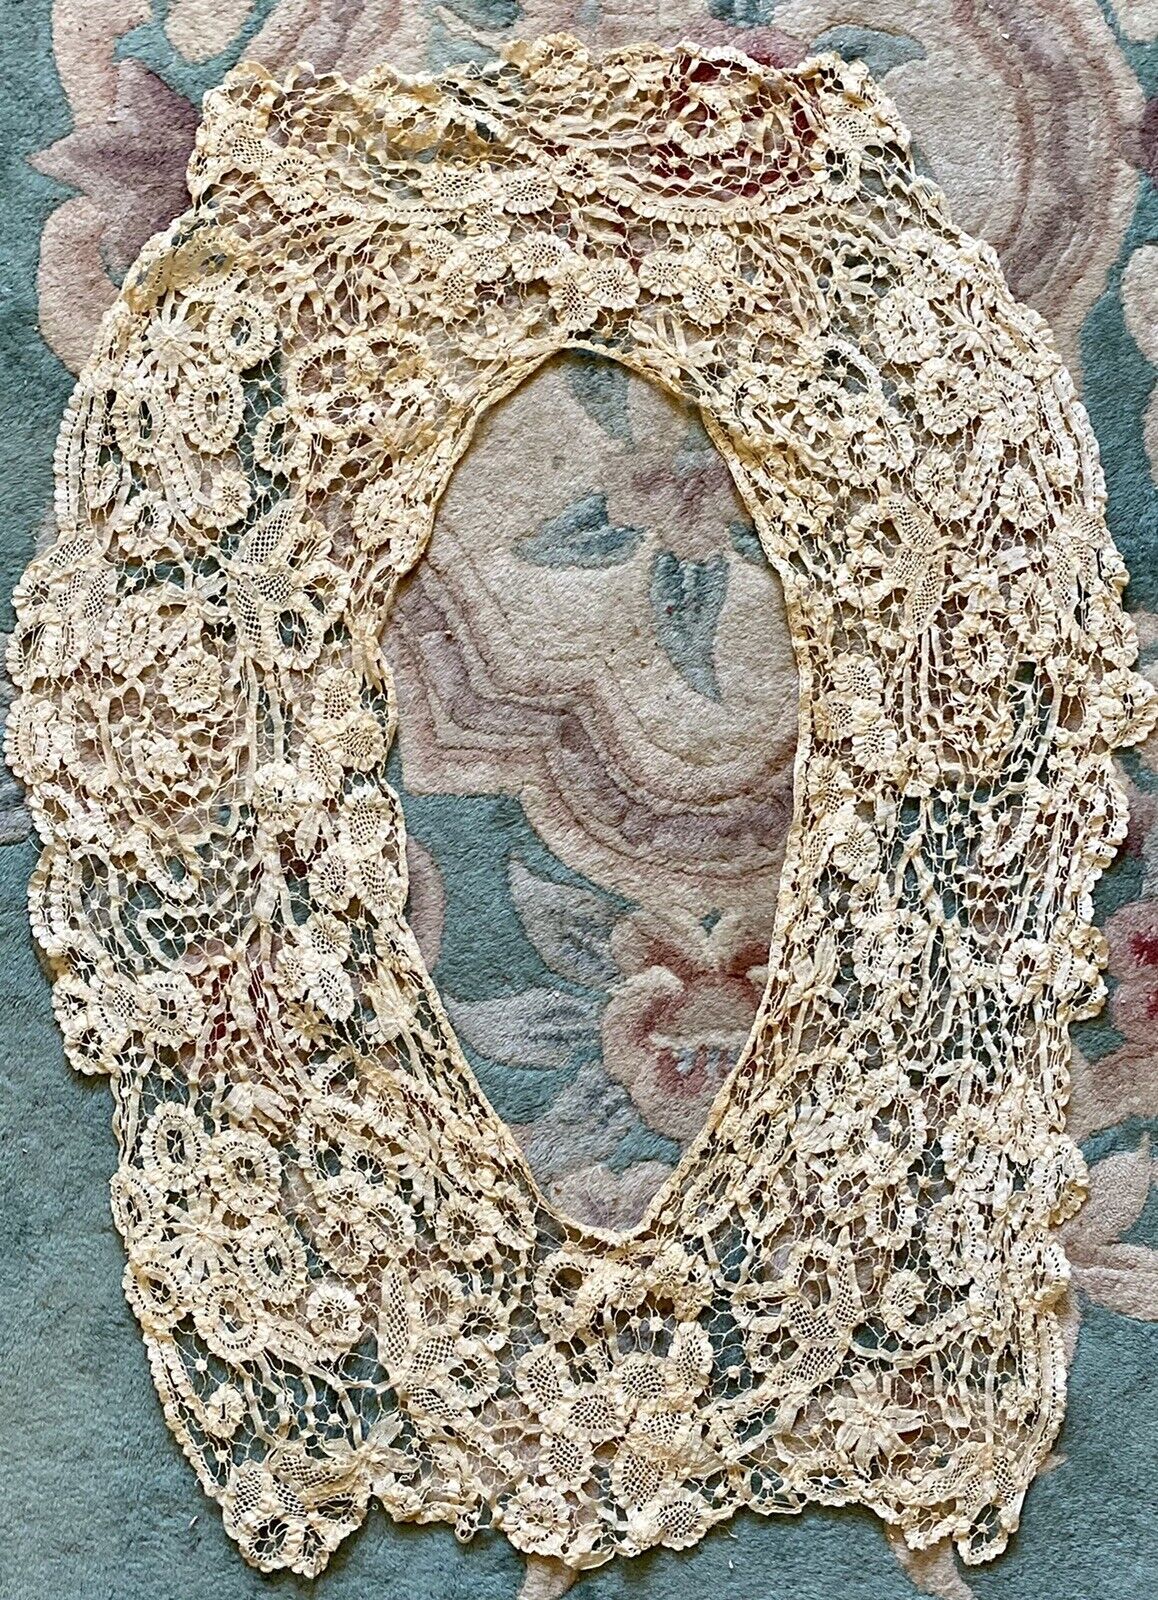 Extremely Rare Early Antique Ladies Handmade Lace Collar